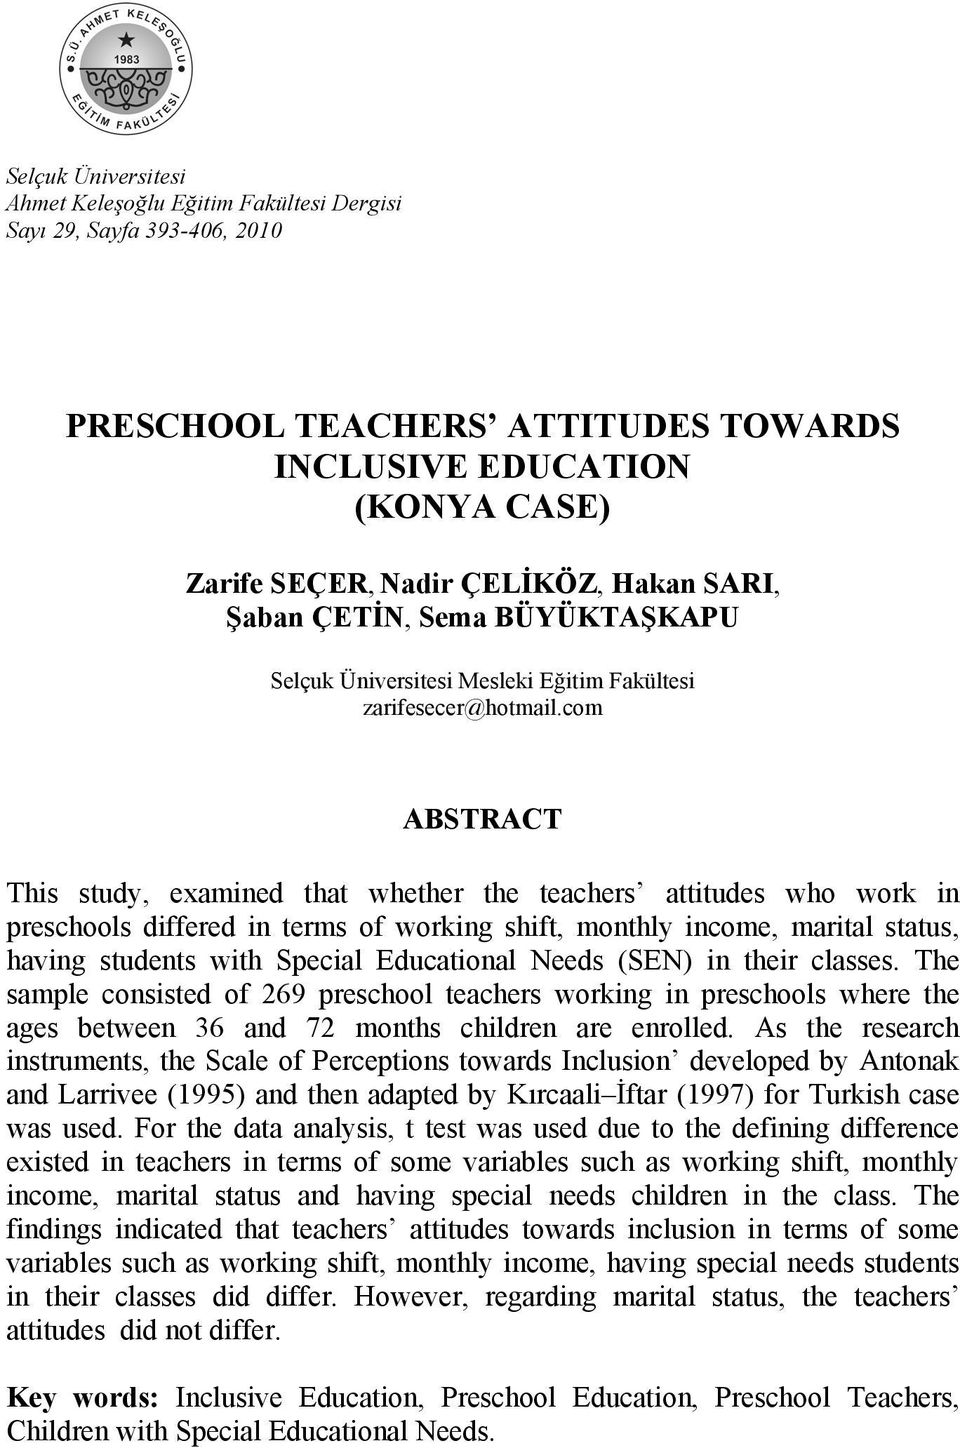 com ABSTRACT This study, examined that whether the teachers attitudes who work in preschools differed in terms of working shift, monthly income, marital status, having students with Special